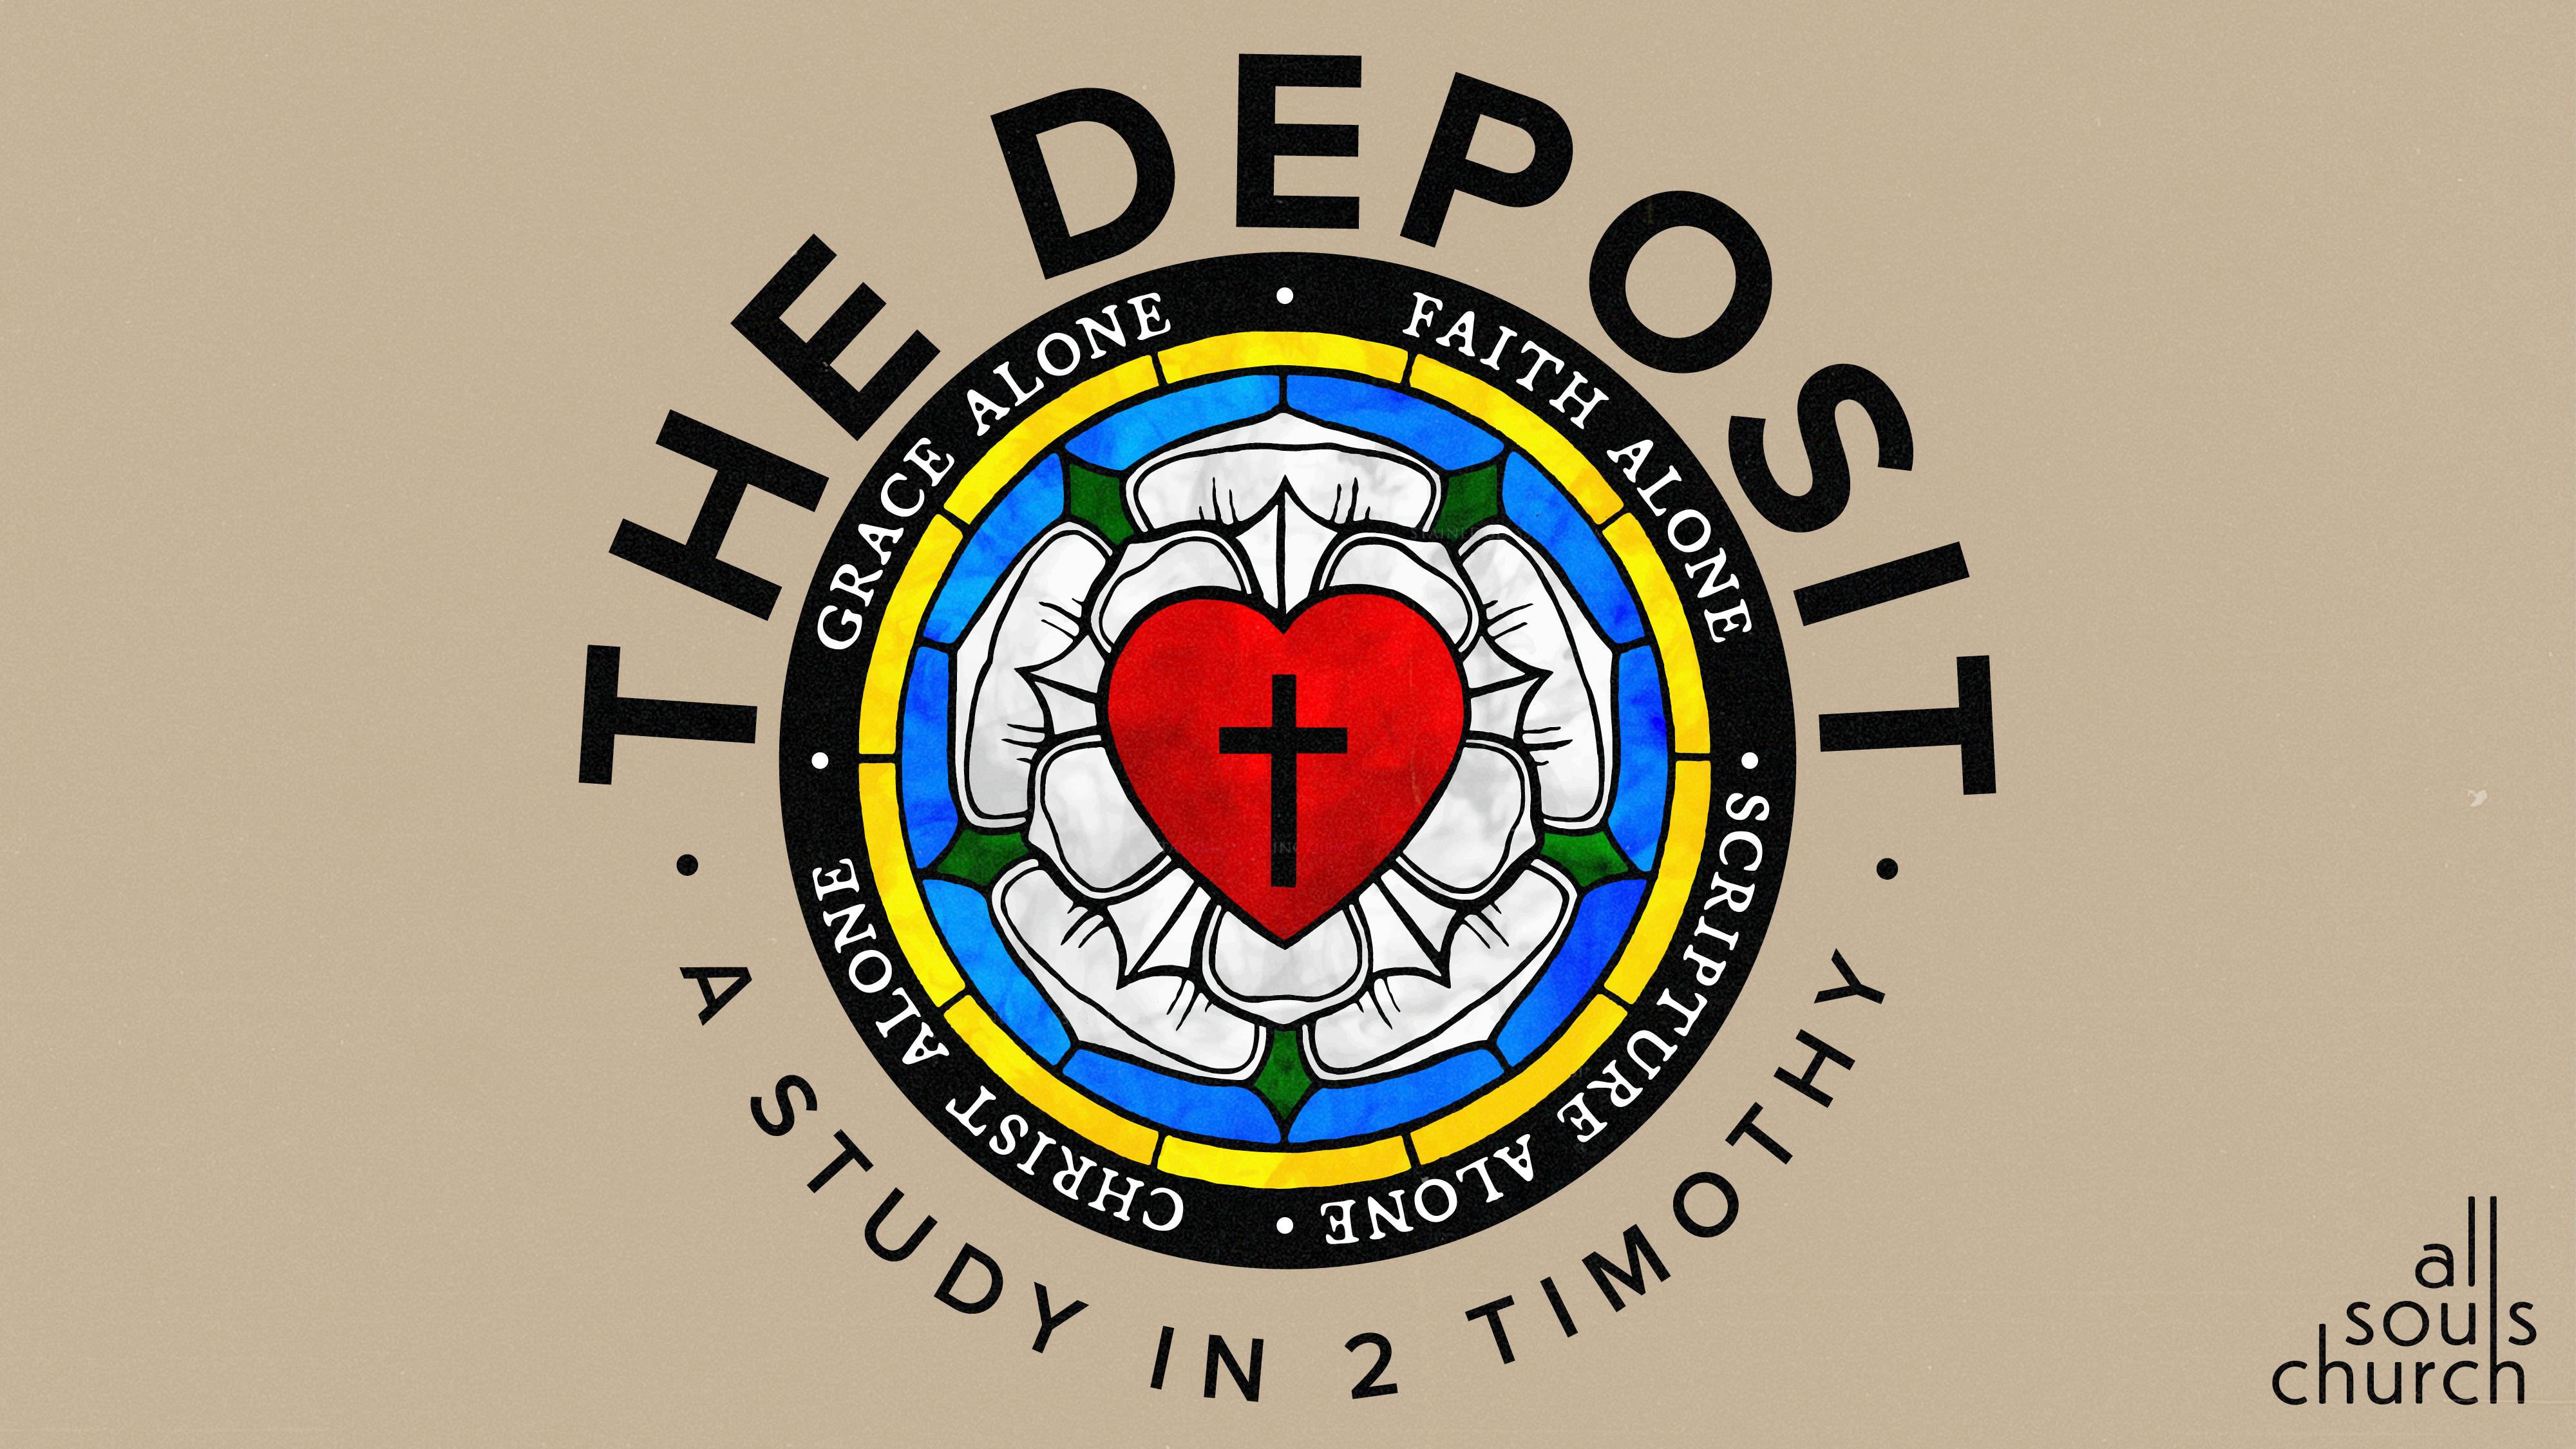 2 Timothy - The Deposit: God-Breathed cover for post